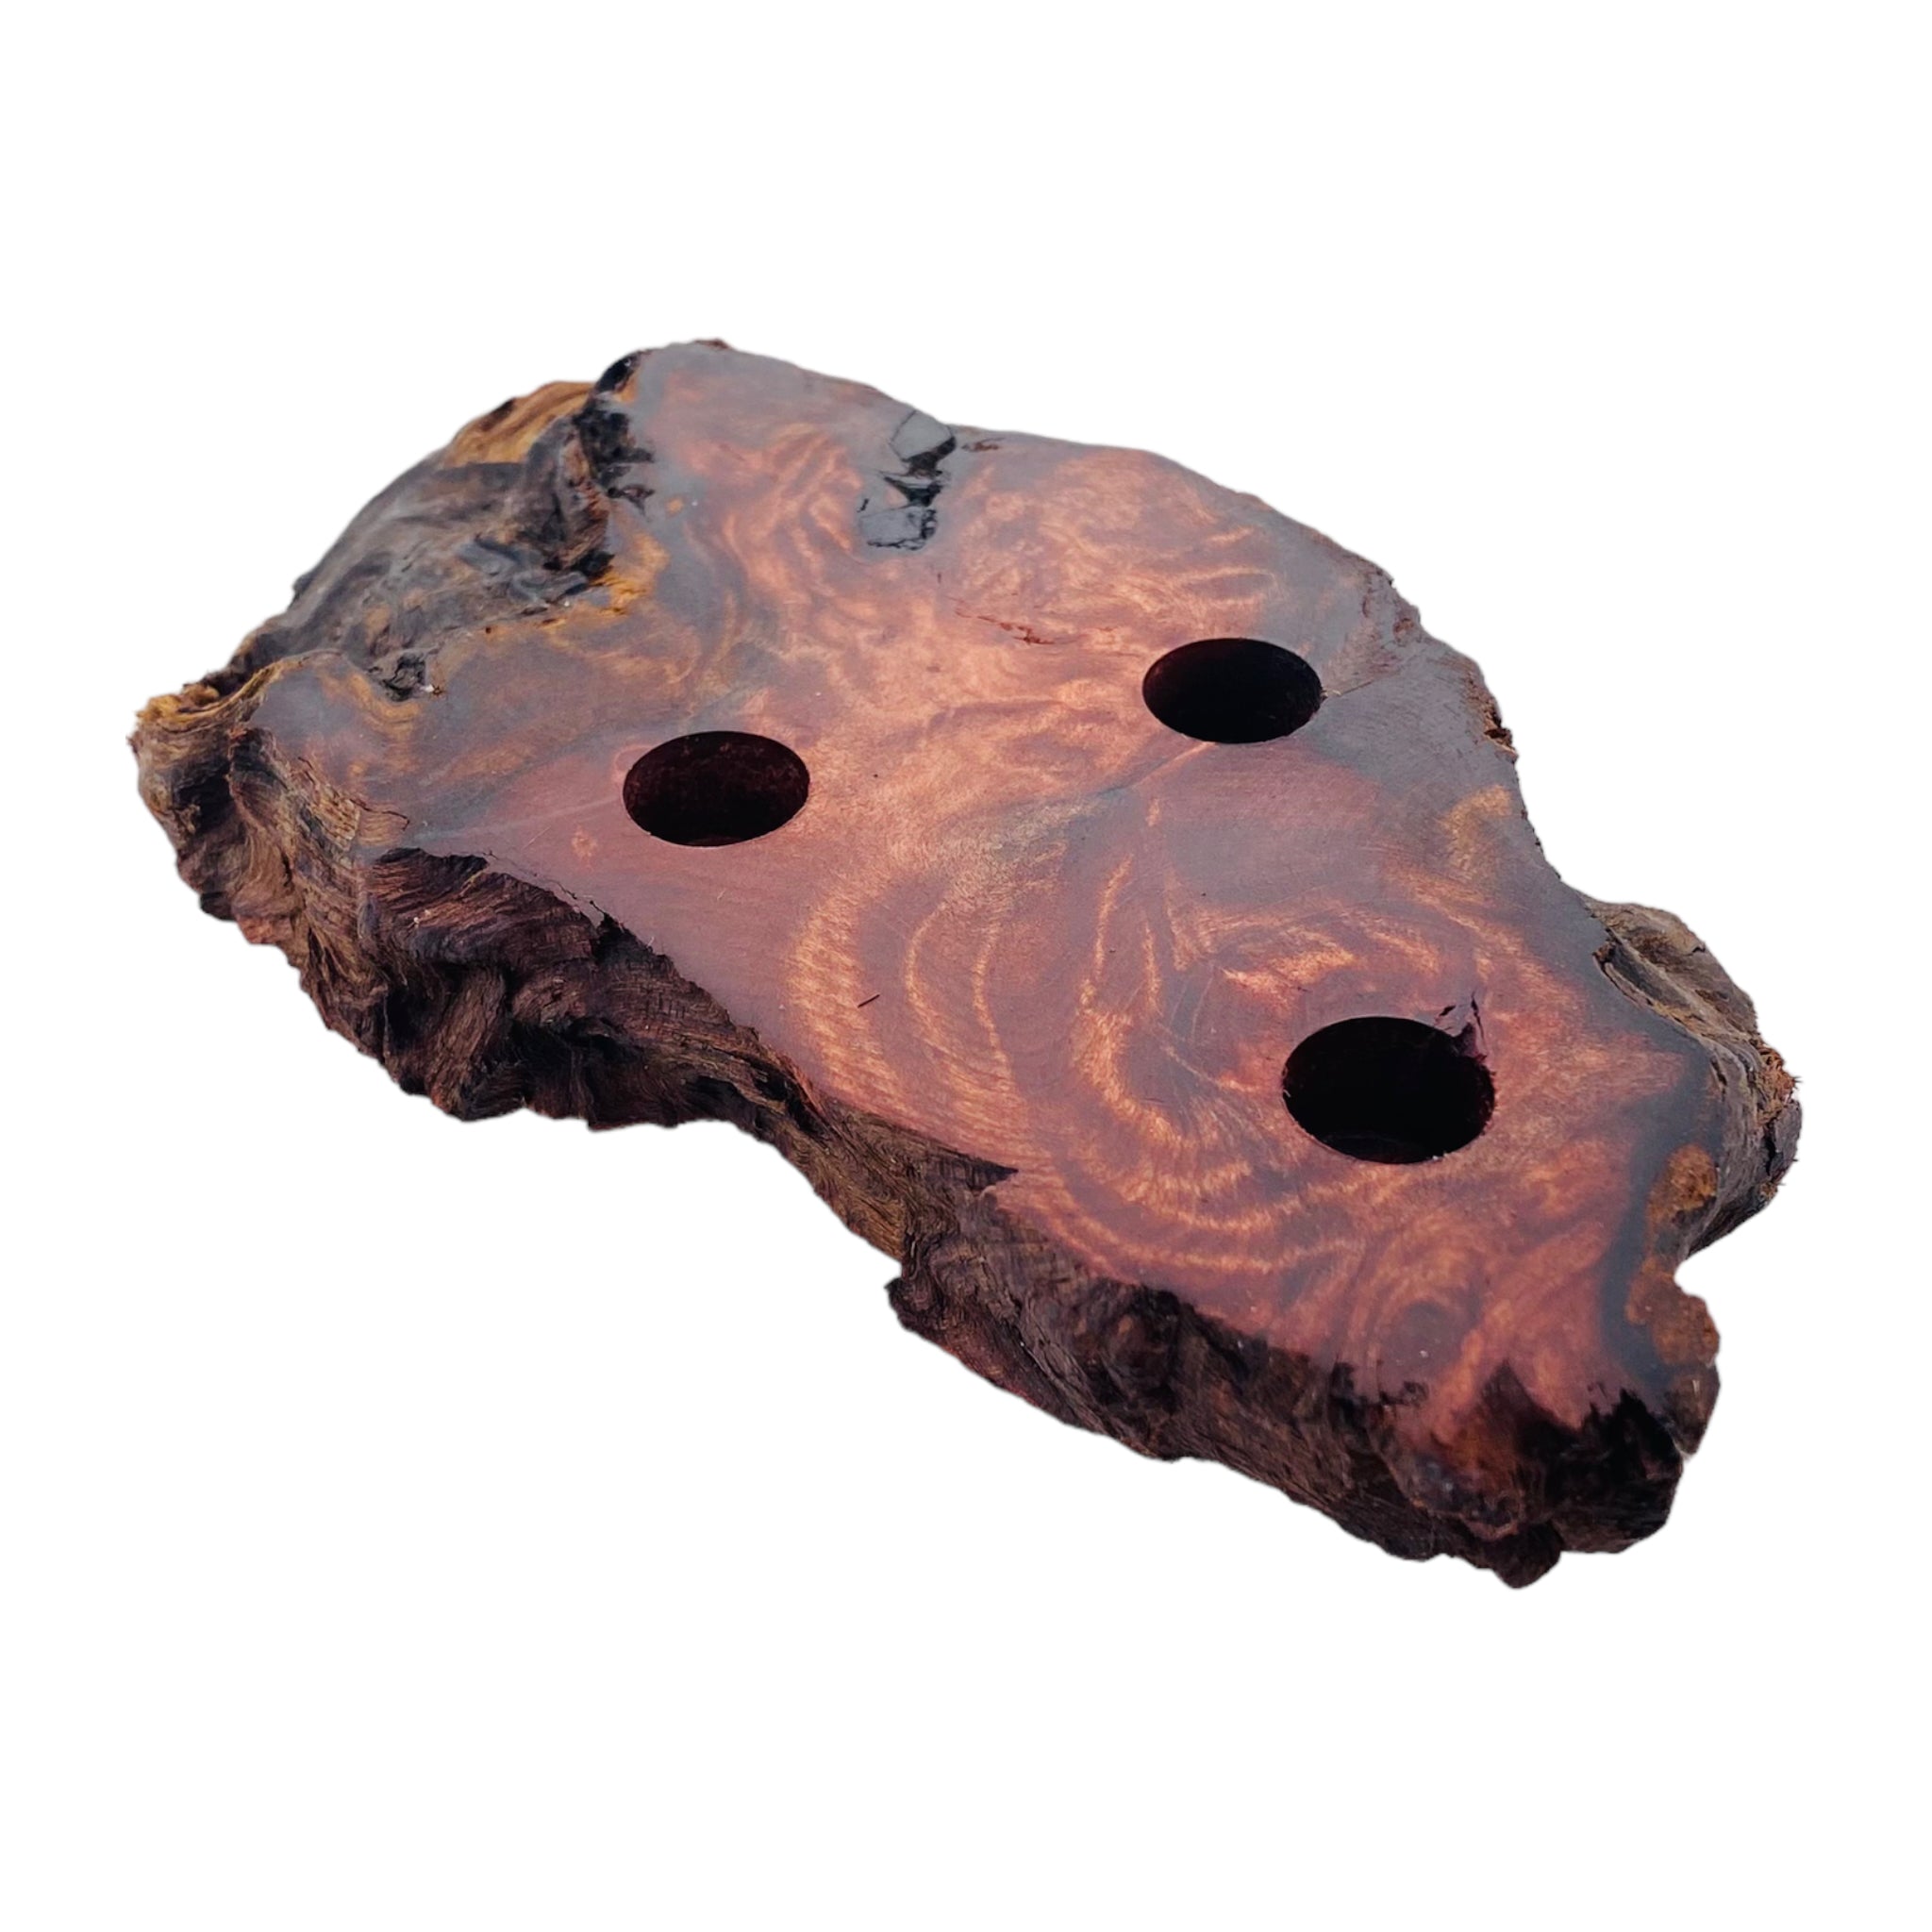 3 Hole Wood Display Stand Holder For 14mm Bong Bowl Pieces Or Quartz Bangers - Red Wood Burl With Live Edge